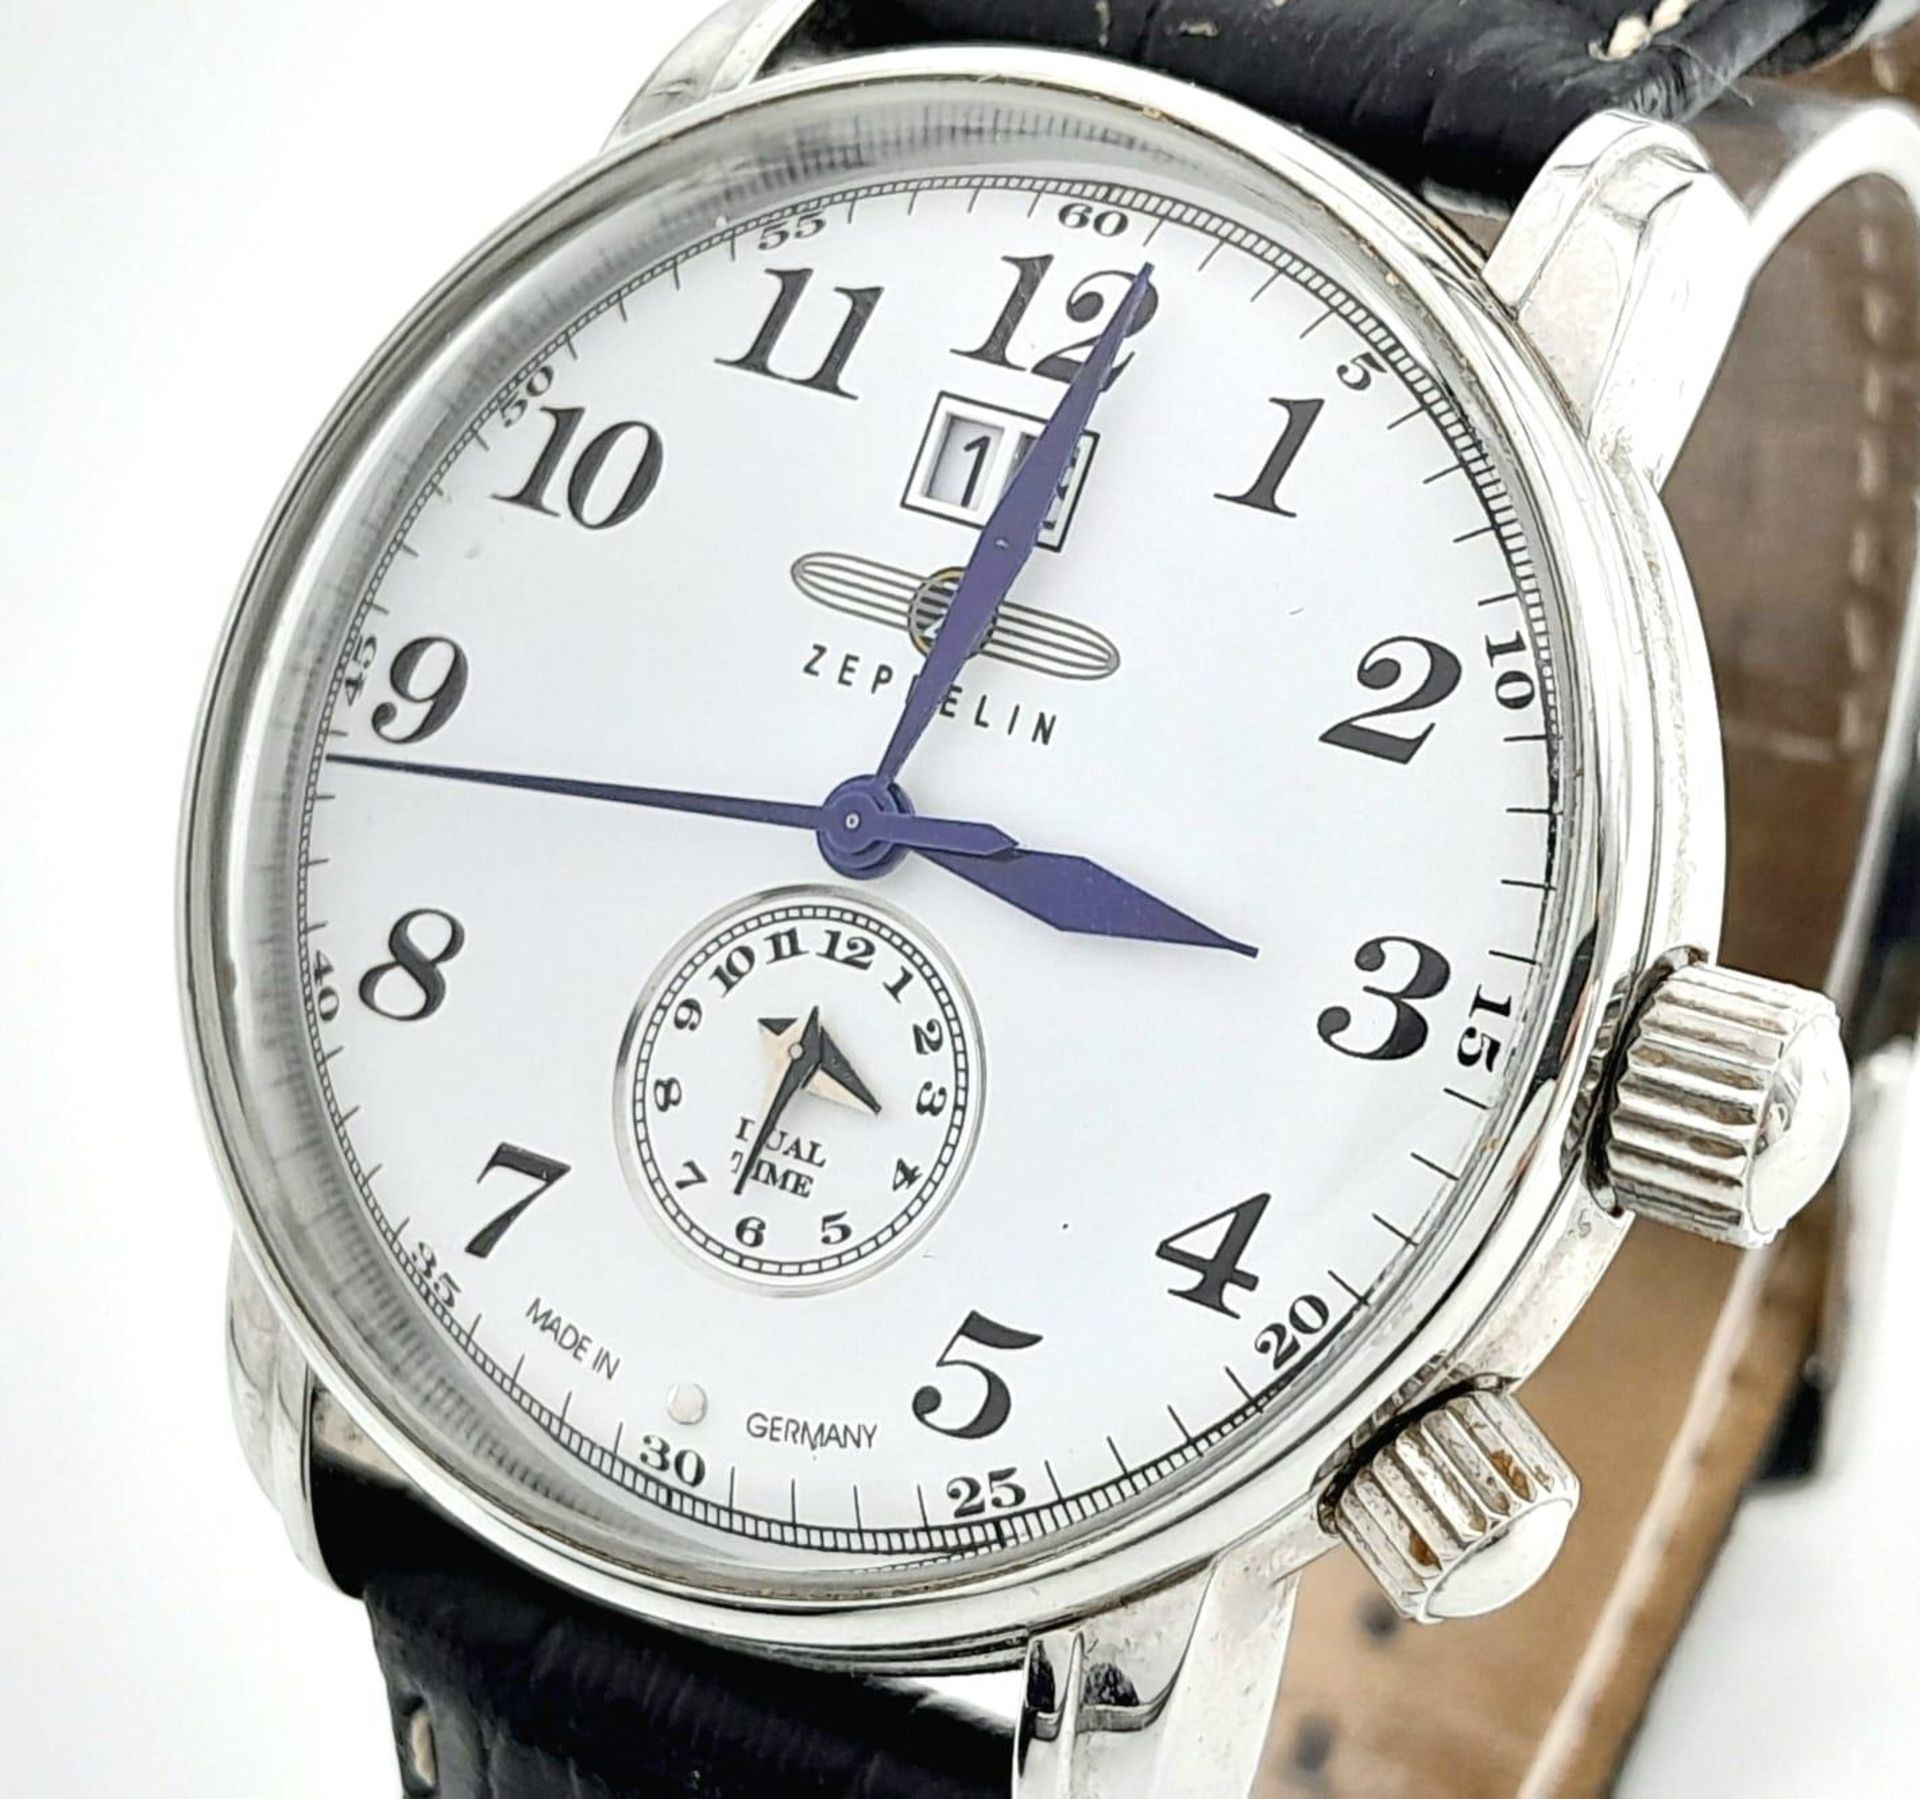 A German Made Zeppelin Dual Time Gents Quartz Watch. Black leather strap. Stainless steel case - - Image 2 of 7